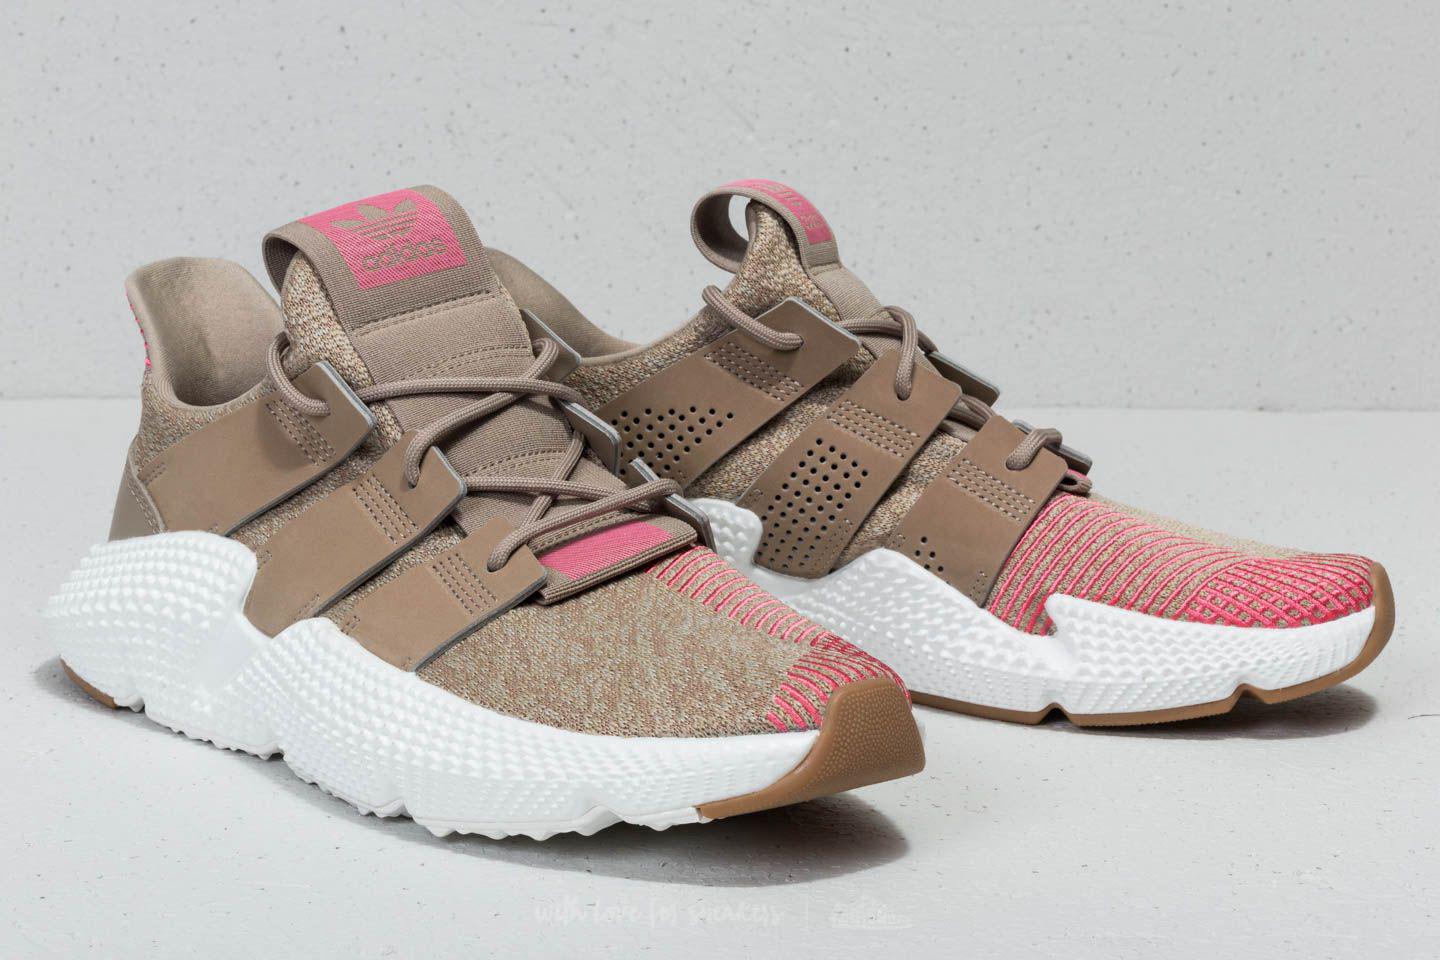 adidas prophere pink